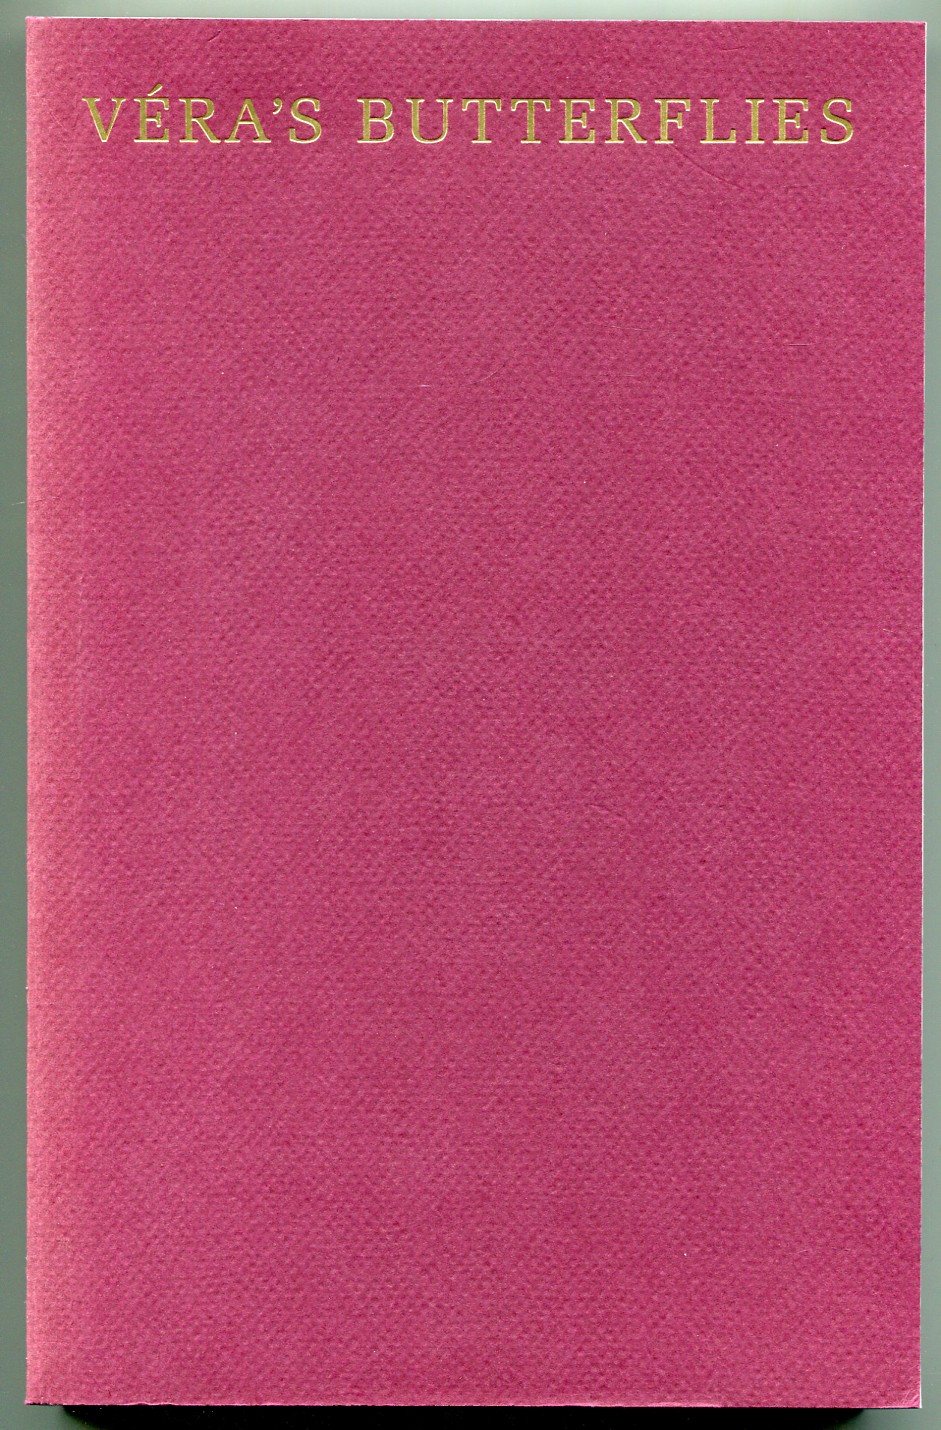 Véra's Butterflies: First Editions by Vladimir Nabokov Inscribed to his Wife - FUNKE, Sarah